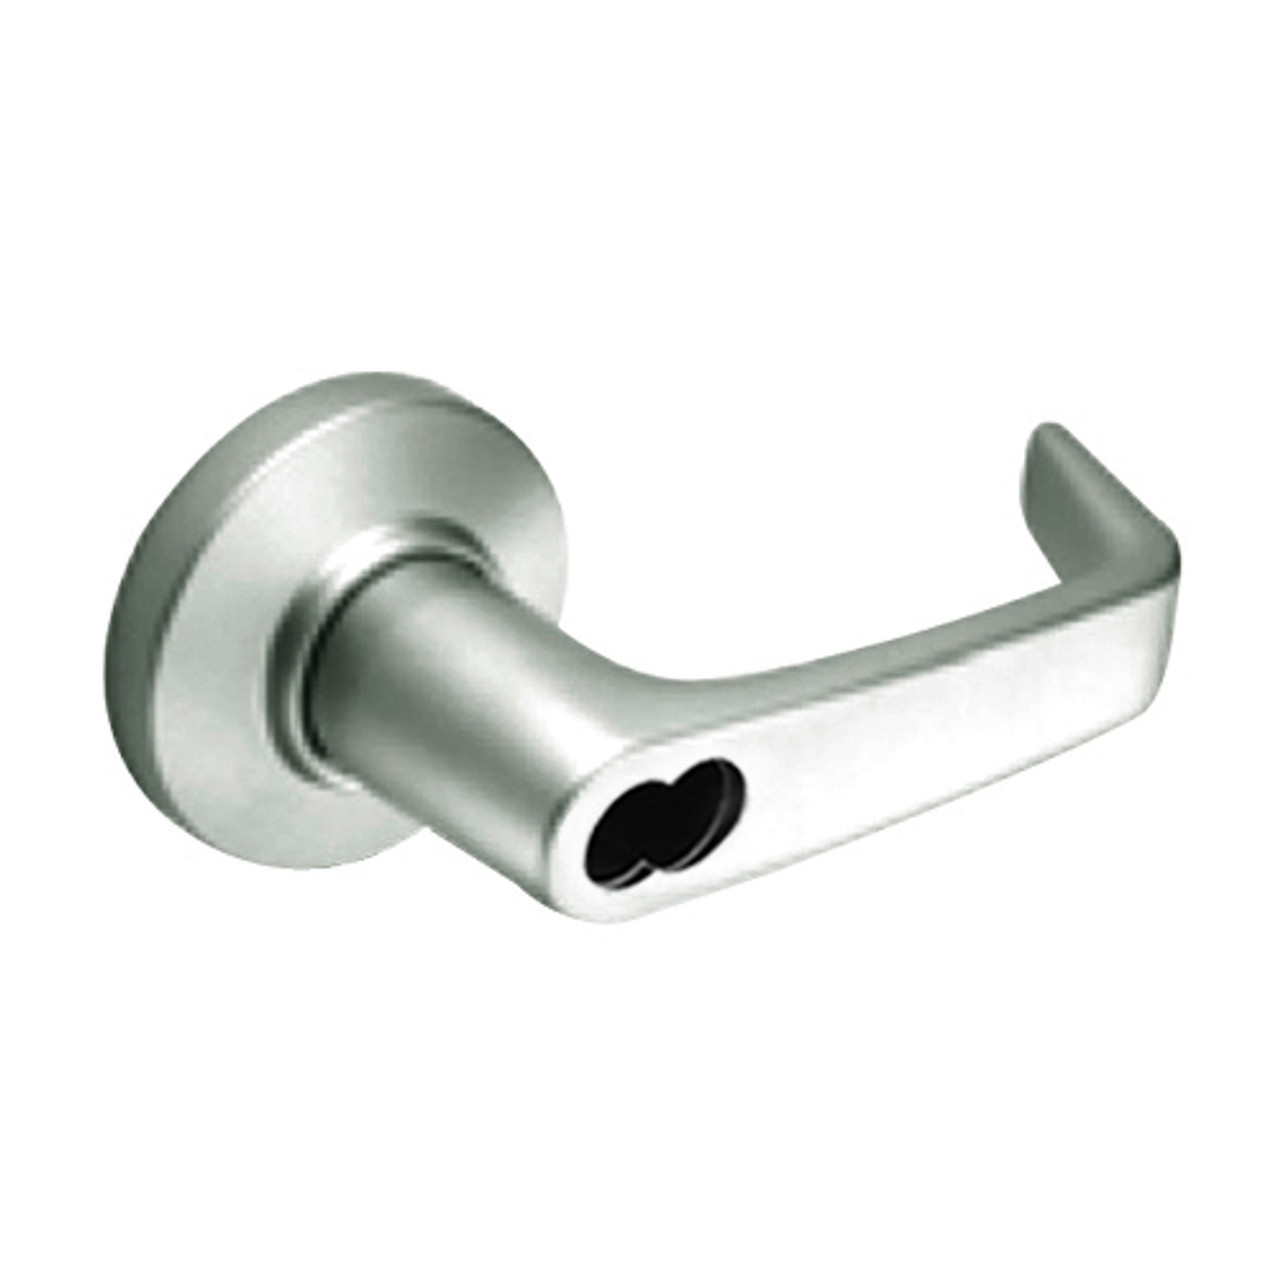 9K37A15CS3619LM Best 9K Series Dormitory or Storeroom Cylindrical Lever Locks with Contour Angle with Return Lever Design Accept 7 Pin Best Core in Satin Nickel